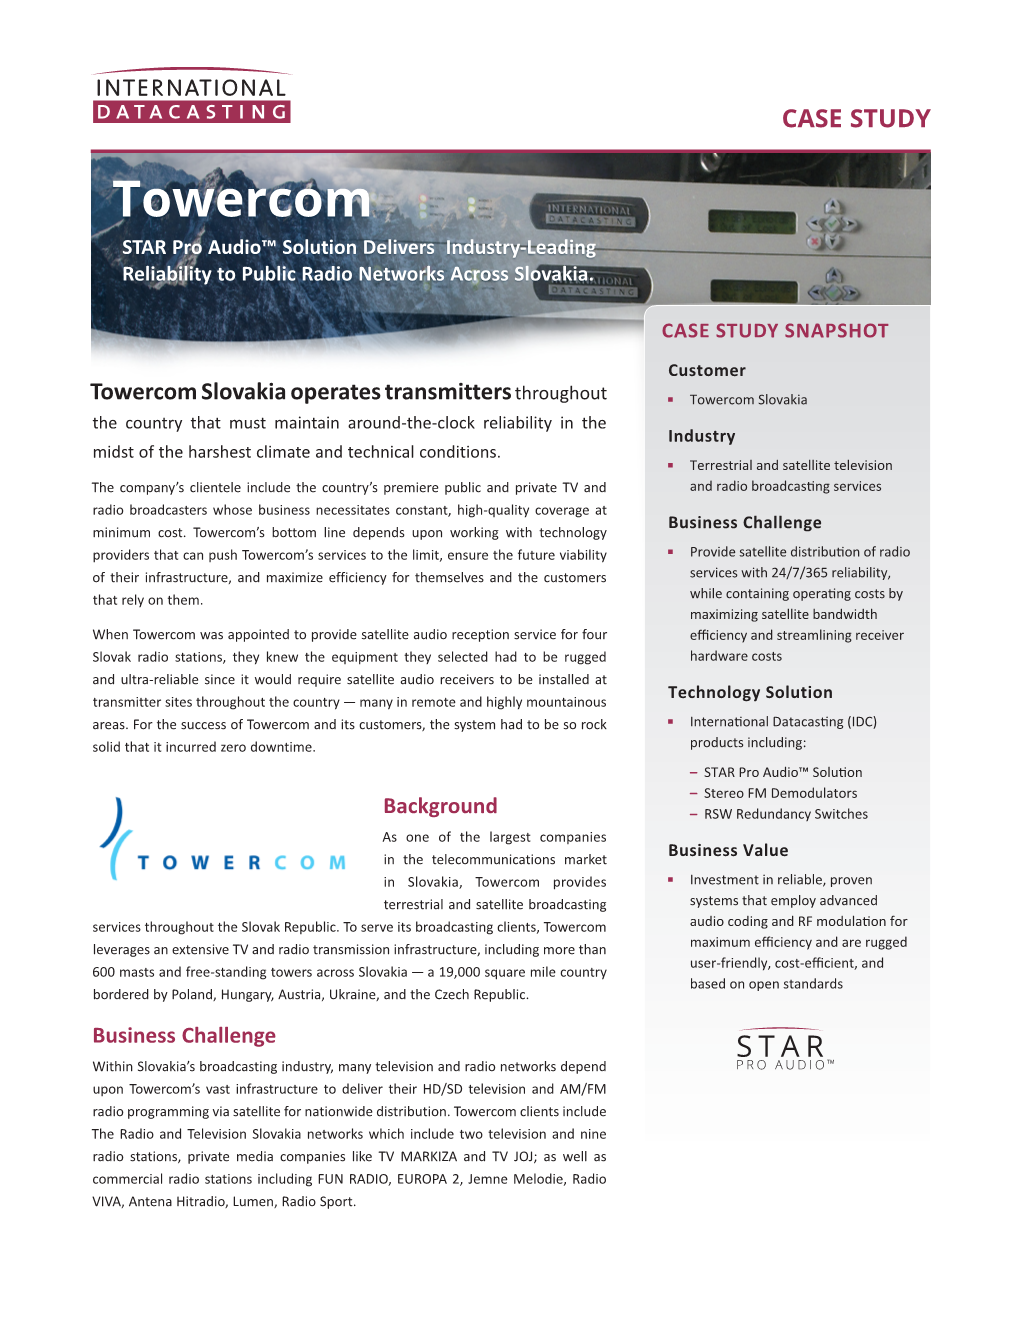 Towercom STAR Pro Audio™ Solution Delivers Industry-Leading Reliability to Public Radio Networks Across Slovakia